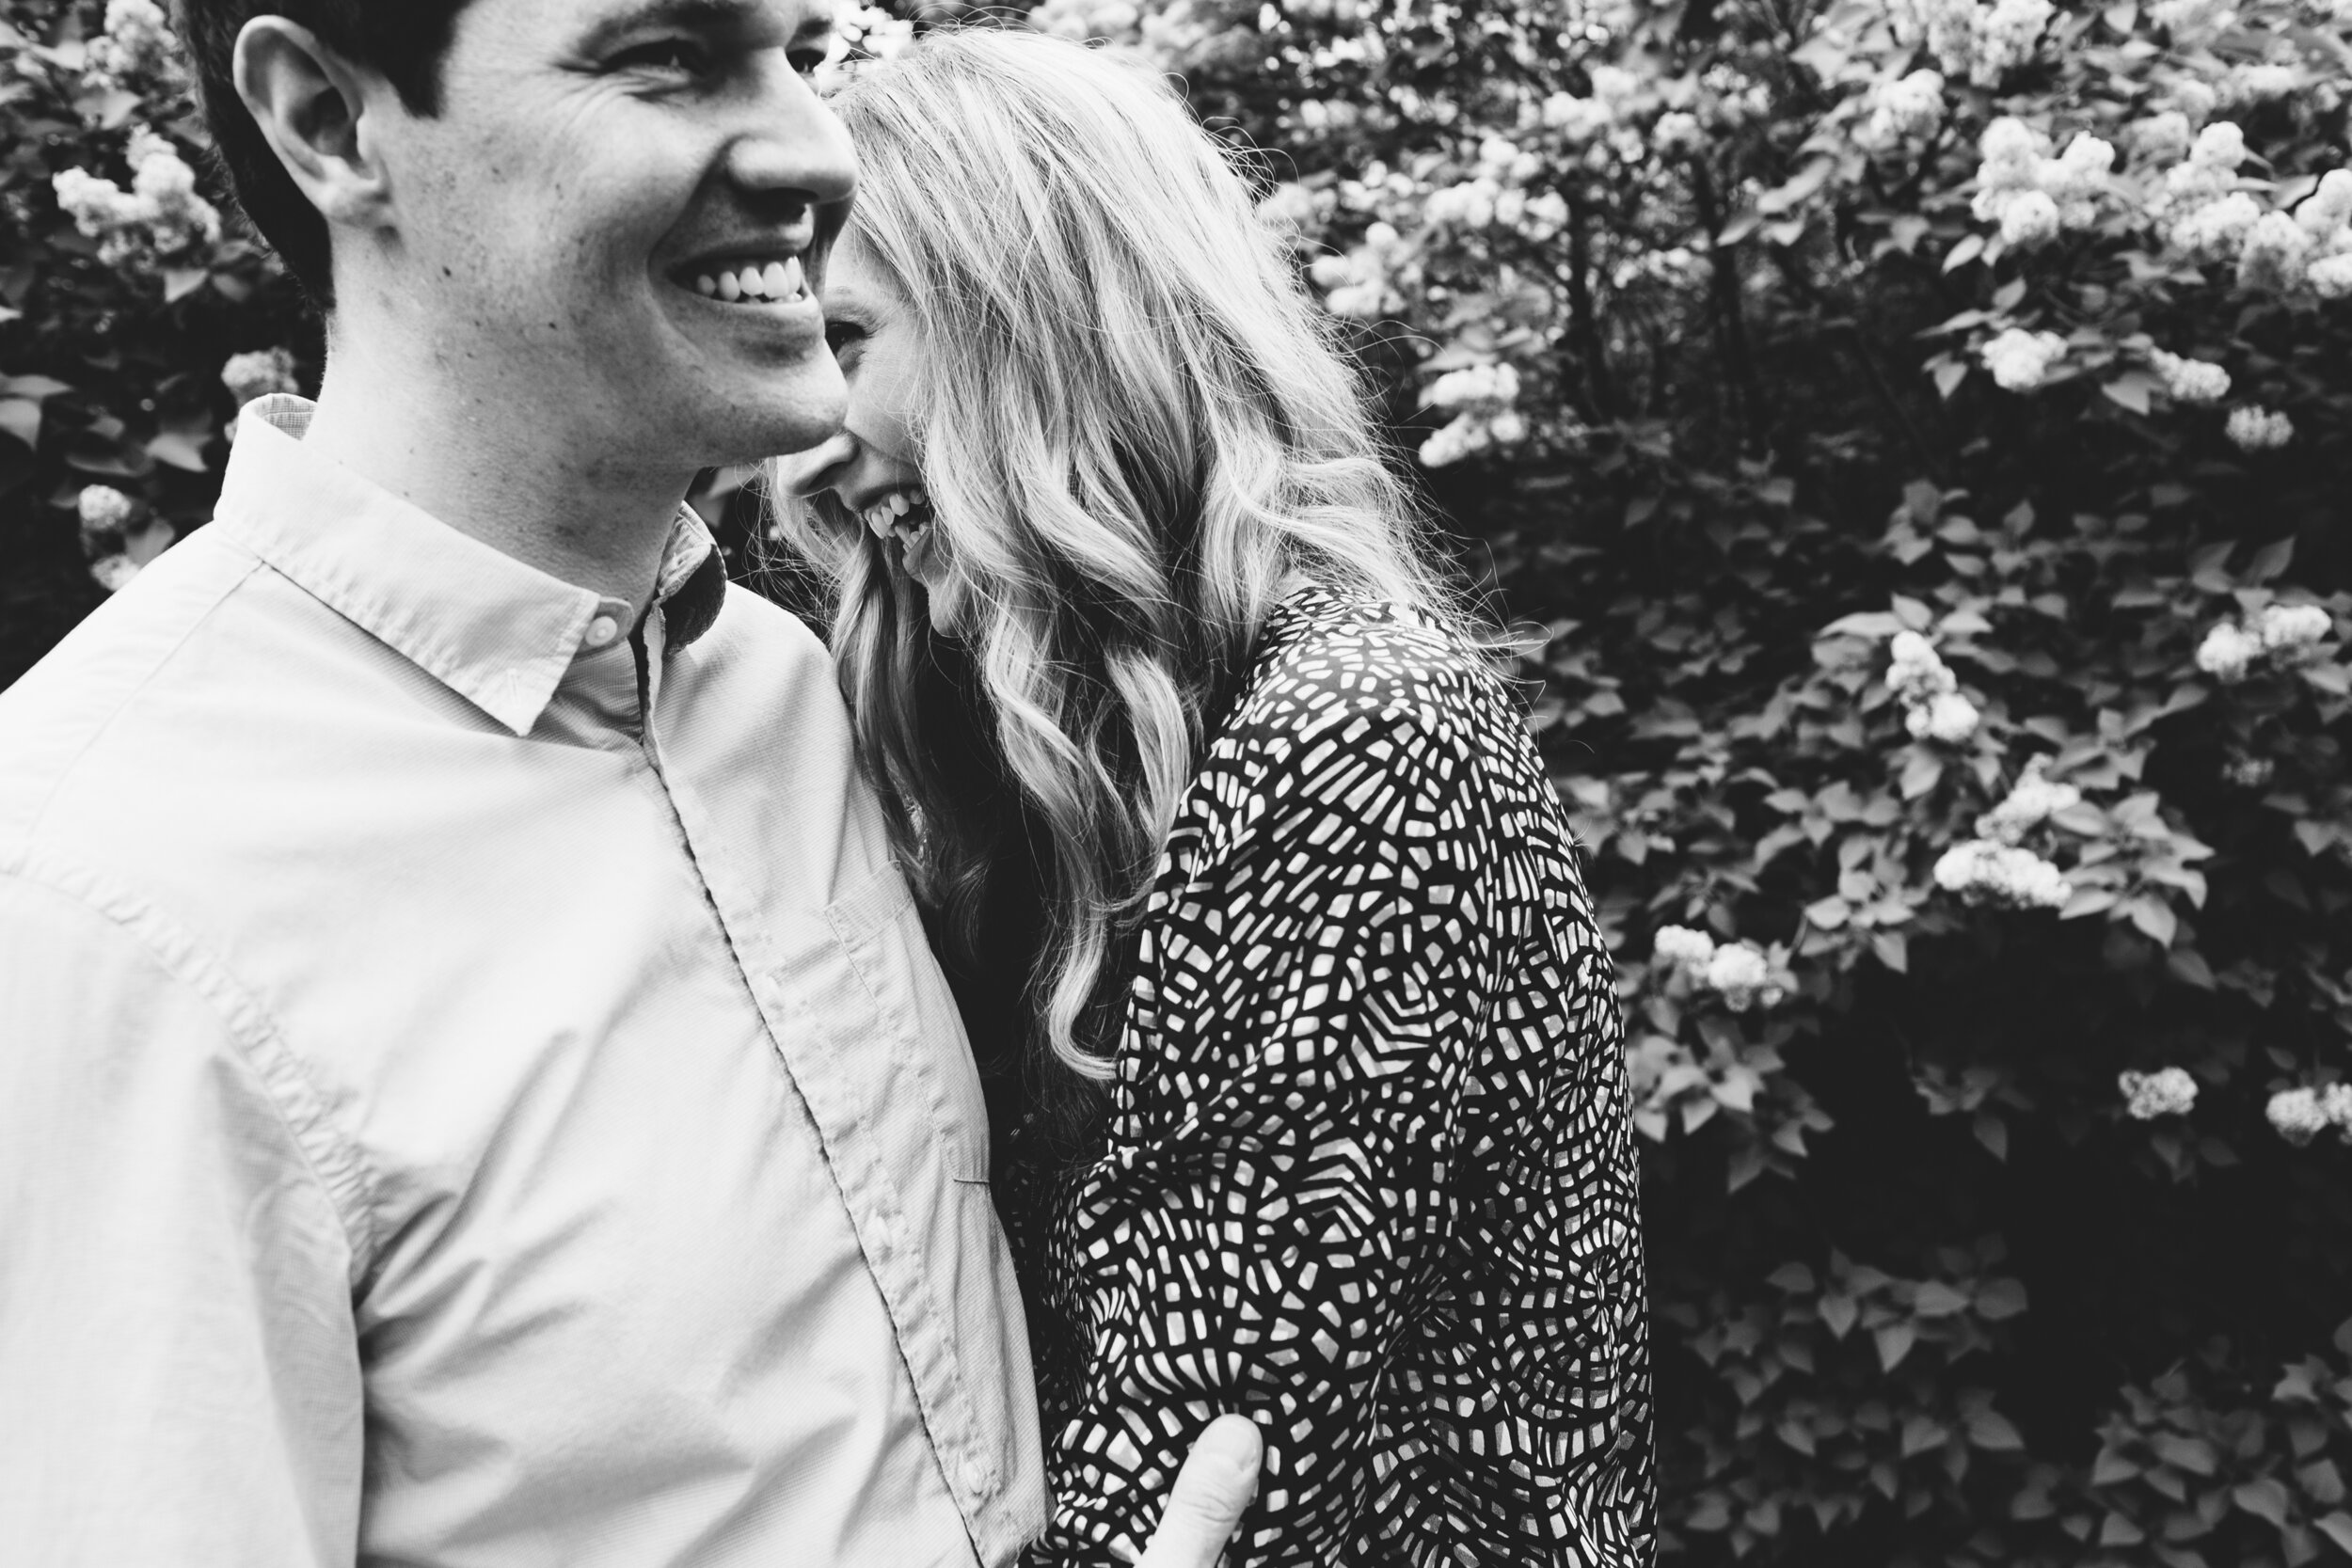 Engagement Photos Minneapolis, MN | Rivets &amp; Roses | Photography by Jess Ekstrand